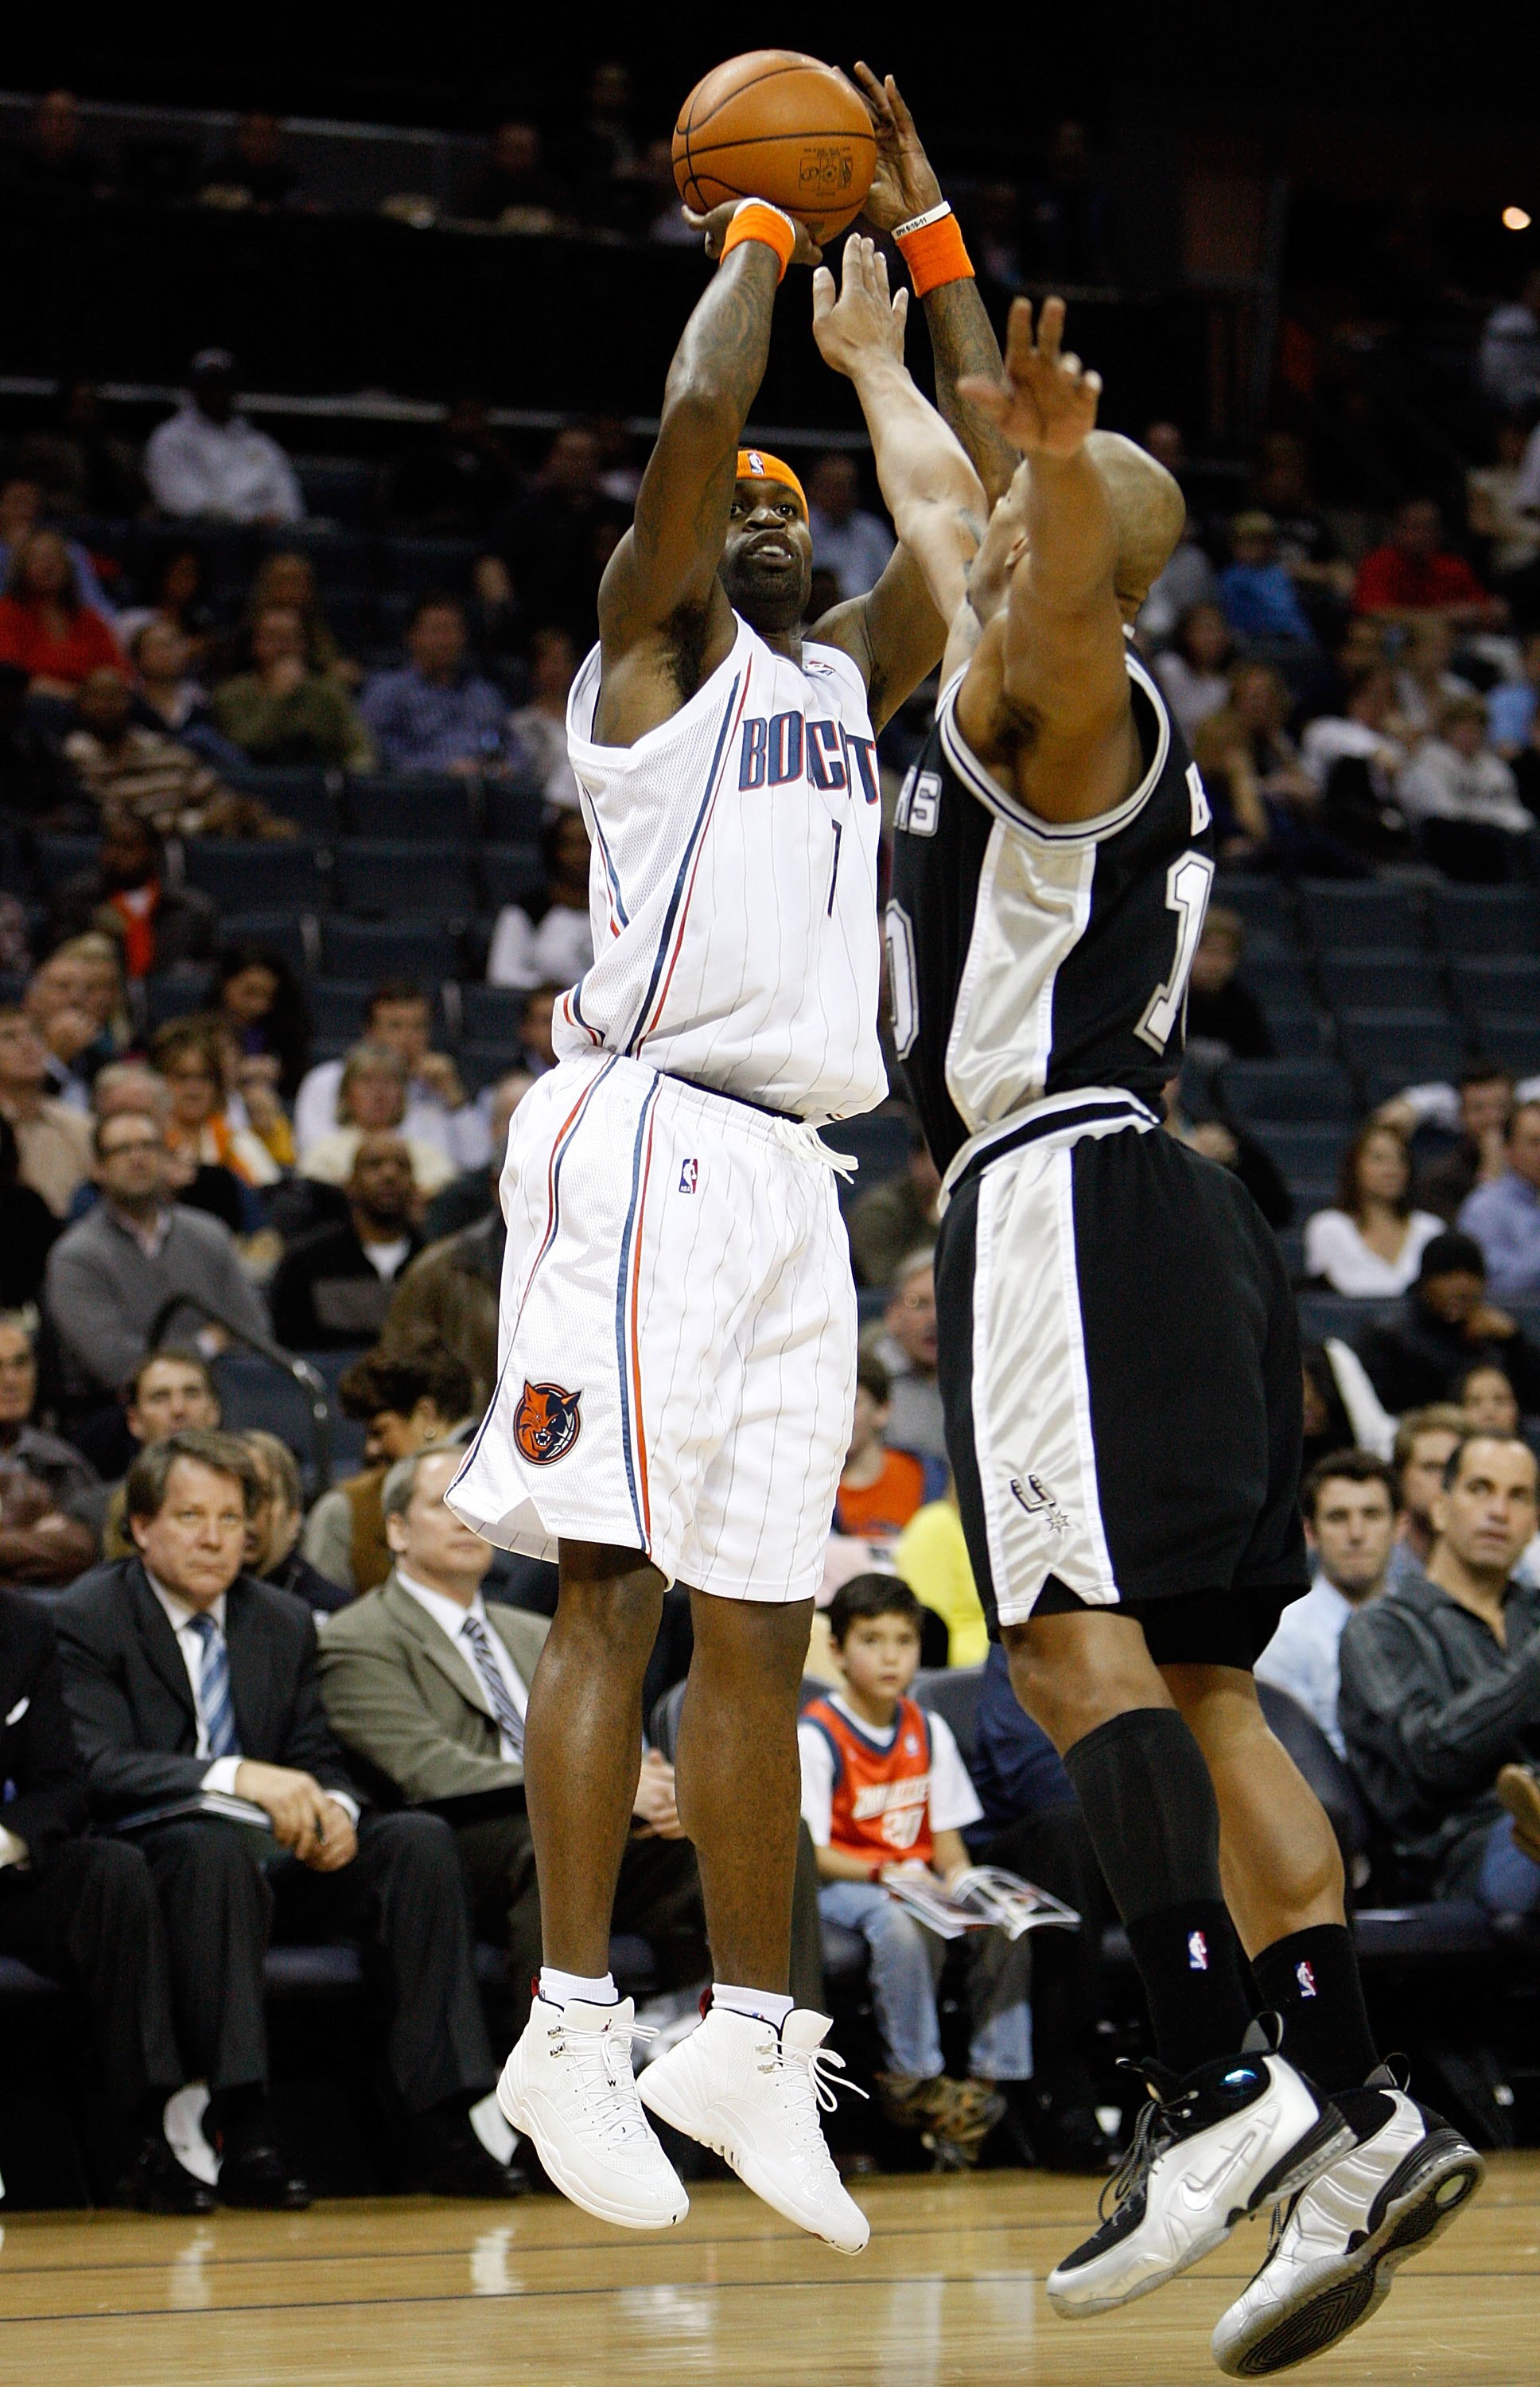 CHARLOTTE, NC - JANUARY 15:  Stephen Jackson #1 of the Charlotte Bobcats shoots over Keith Bogans #10 of the San Antonio Spurs during the game on January 15, 2010 at Time Warner Cable Arena in Charlotte, North Carolina.  The Bobcats won 92-76.  NOTE TO US